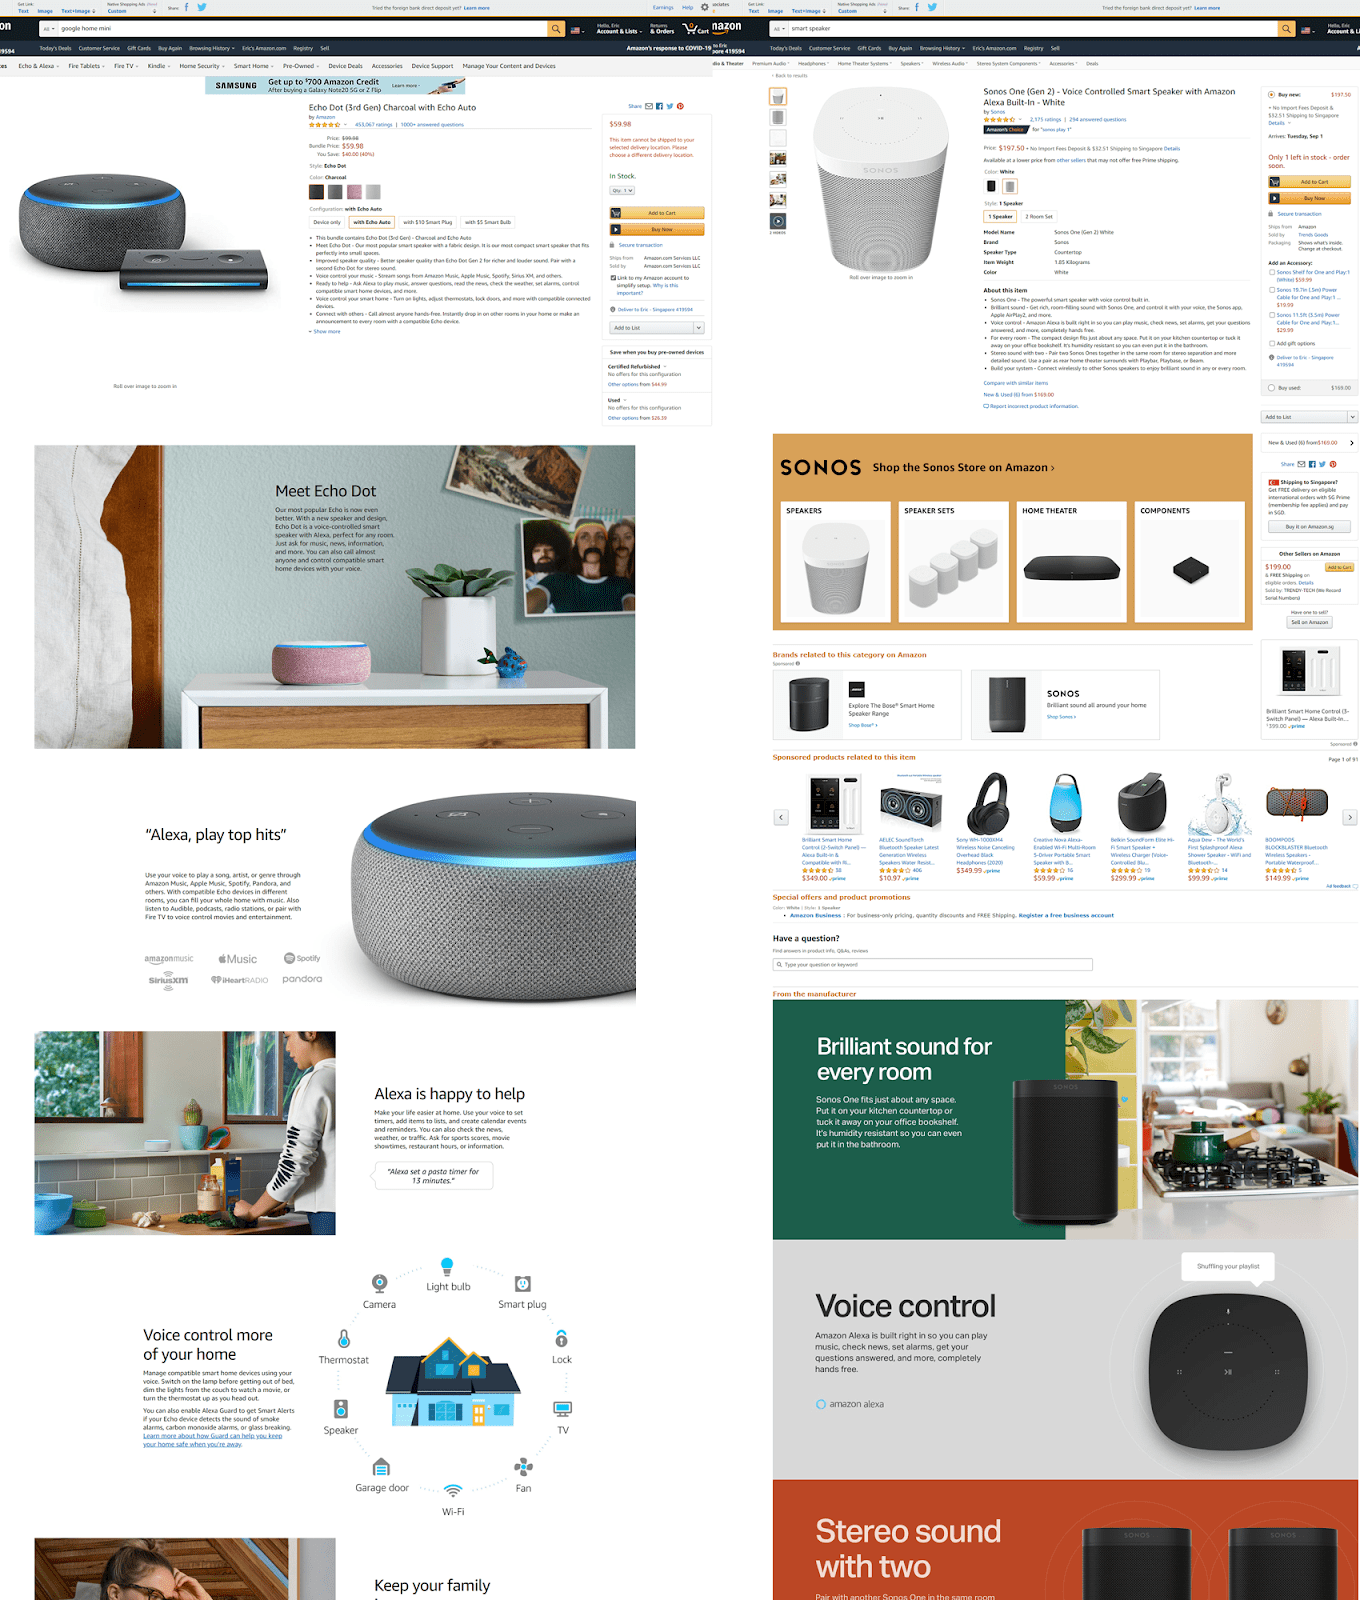 Amazon's product recommendations and sponsored links cluttering the product page